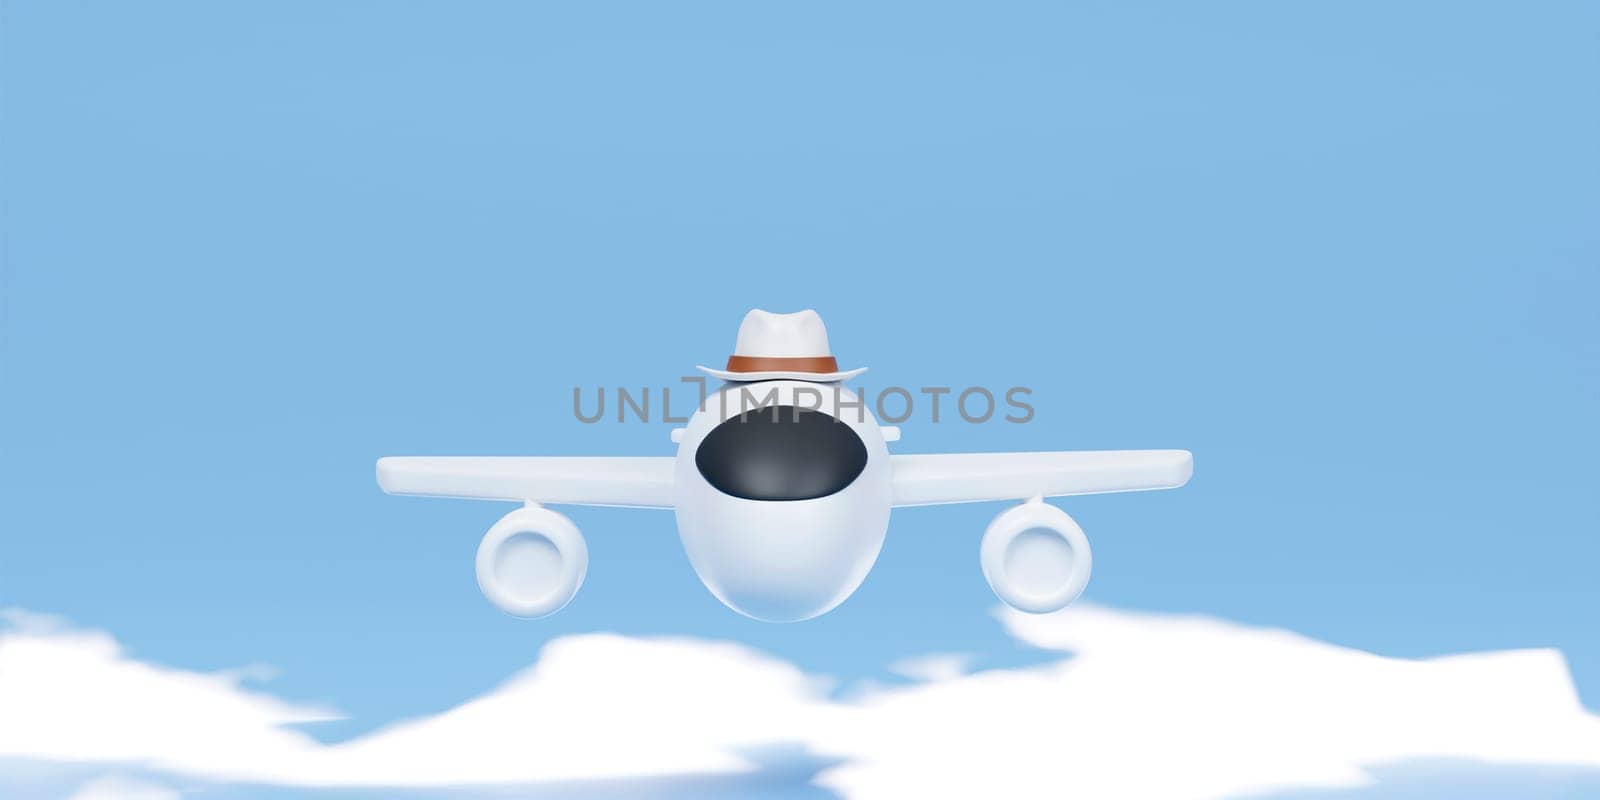 3D Airplane with hat flying traveling concept 3d illustration.